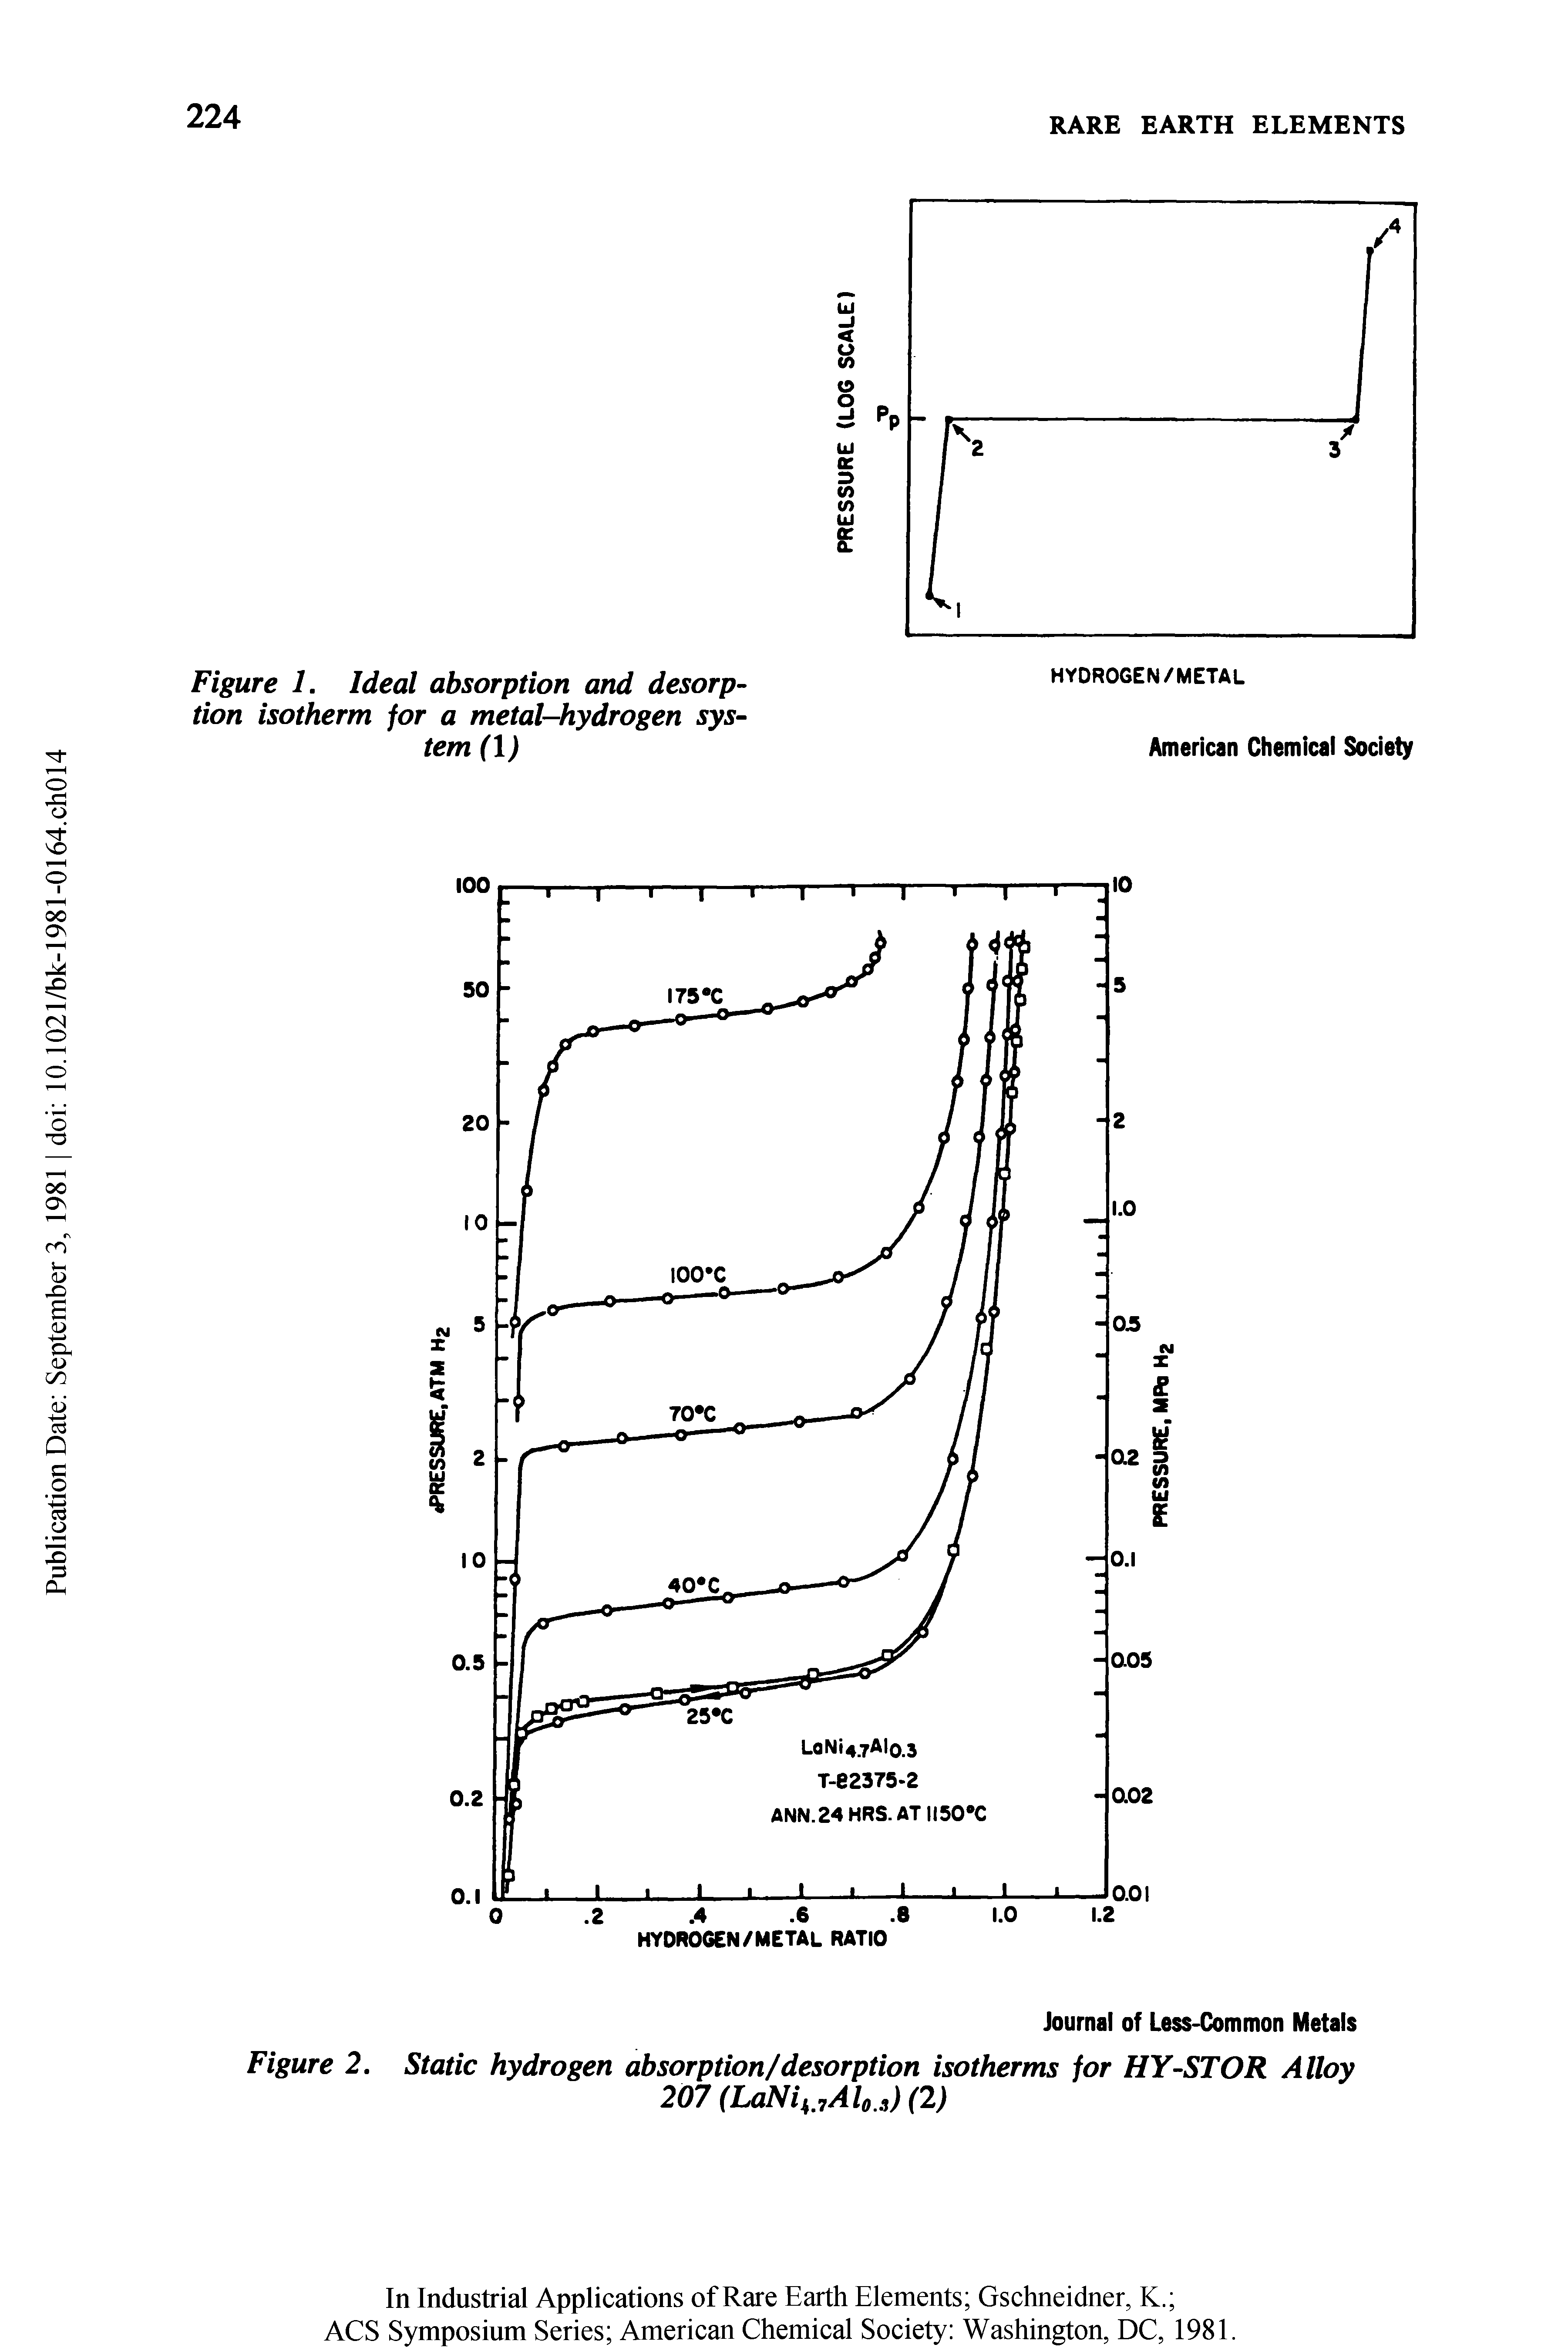 Figure 1. Ideal absorption and desorption isotherm for a metal-hydrogen system (1)...